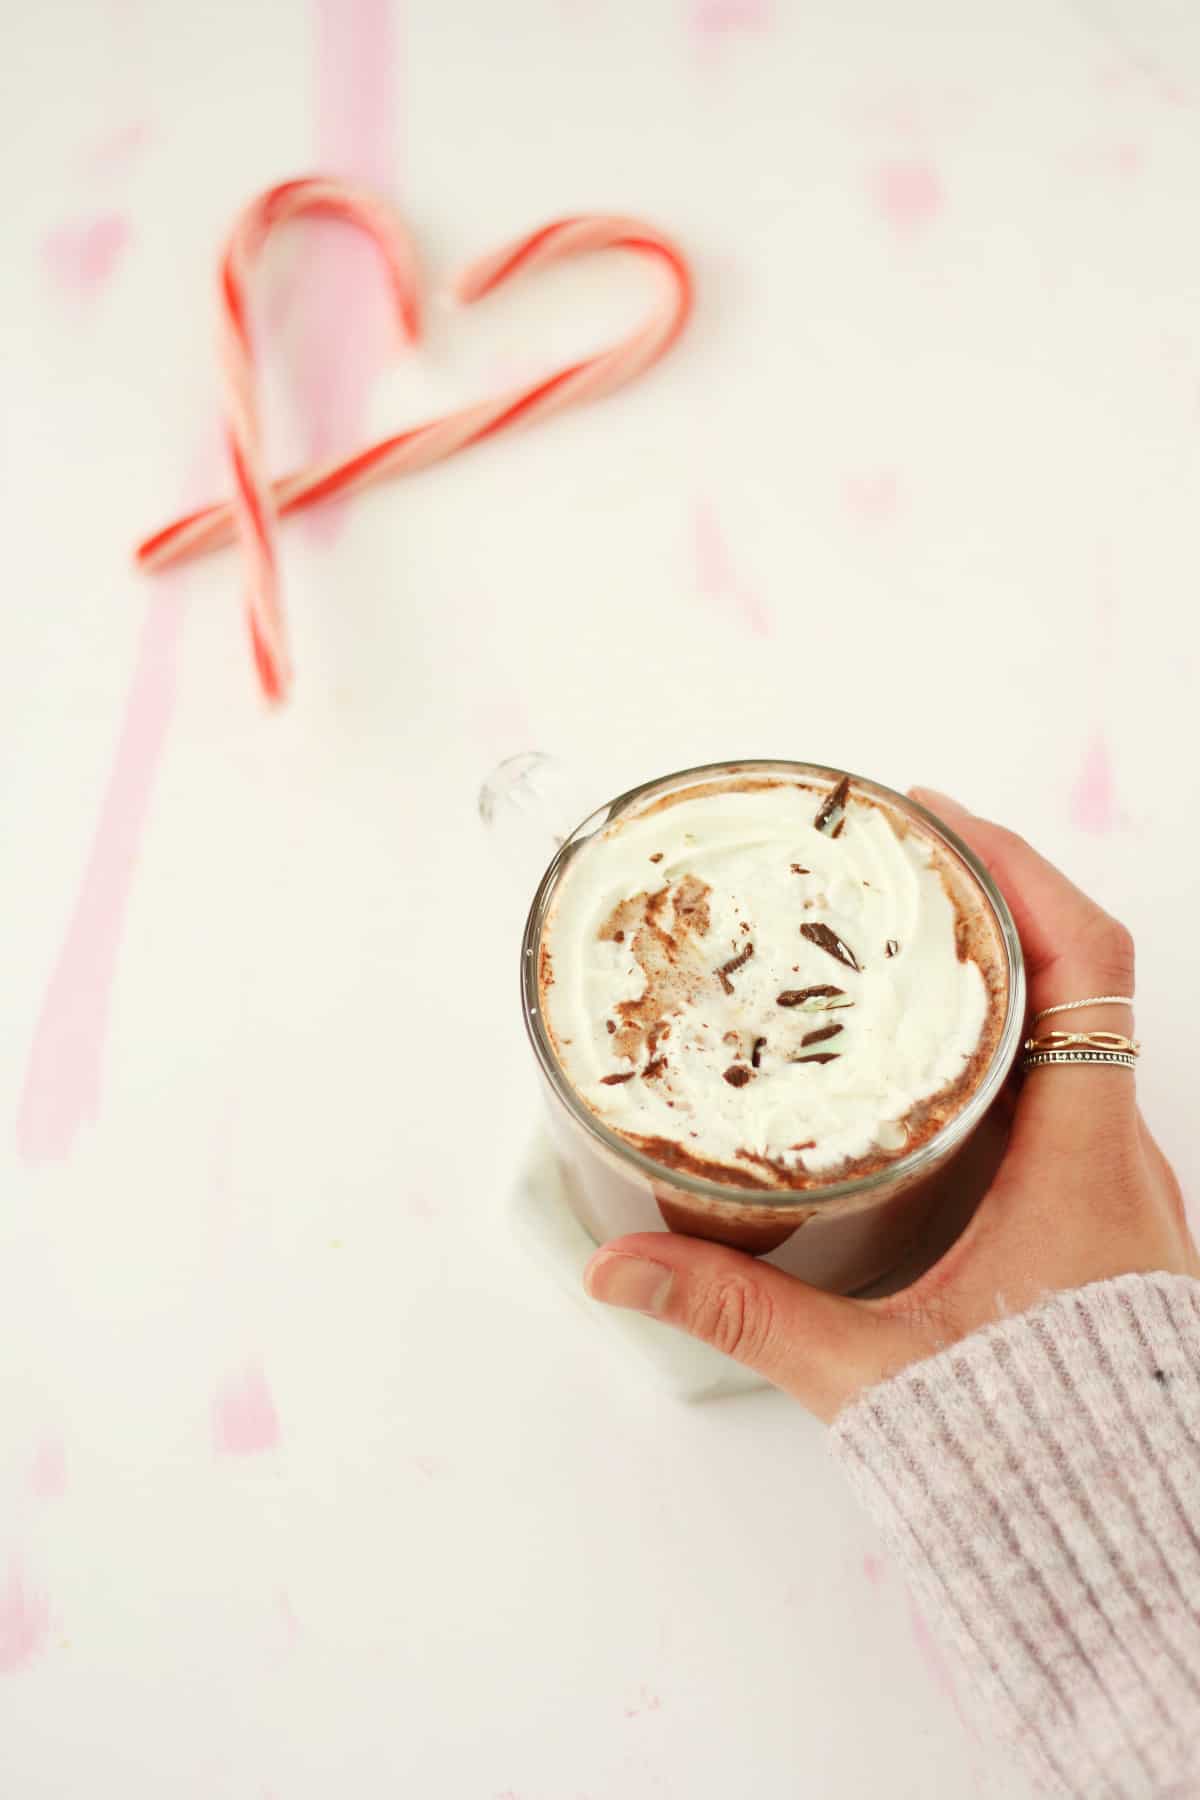 Hand with rings on the second finger holding a clear mug of hot chocolate topped with whipped cream and chocolate shavings. There are a few candy canes in the background.